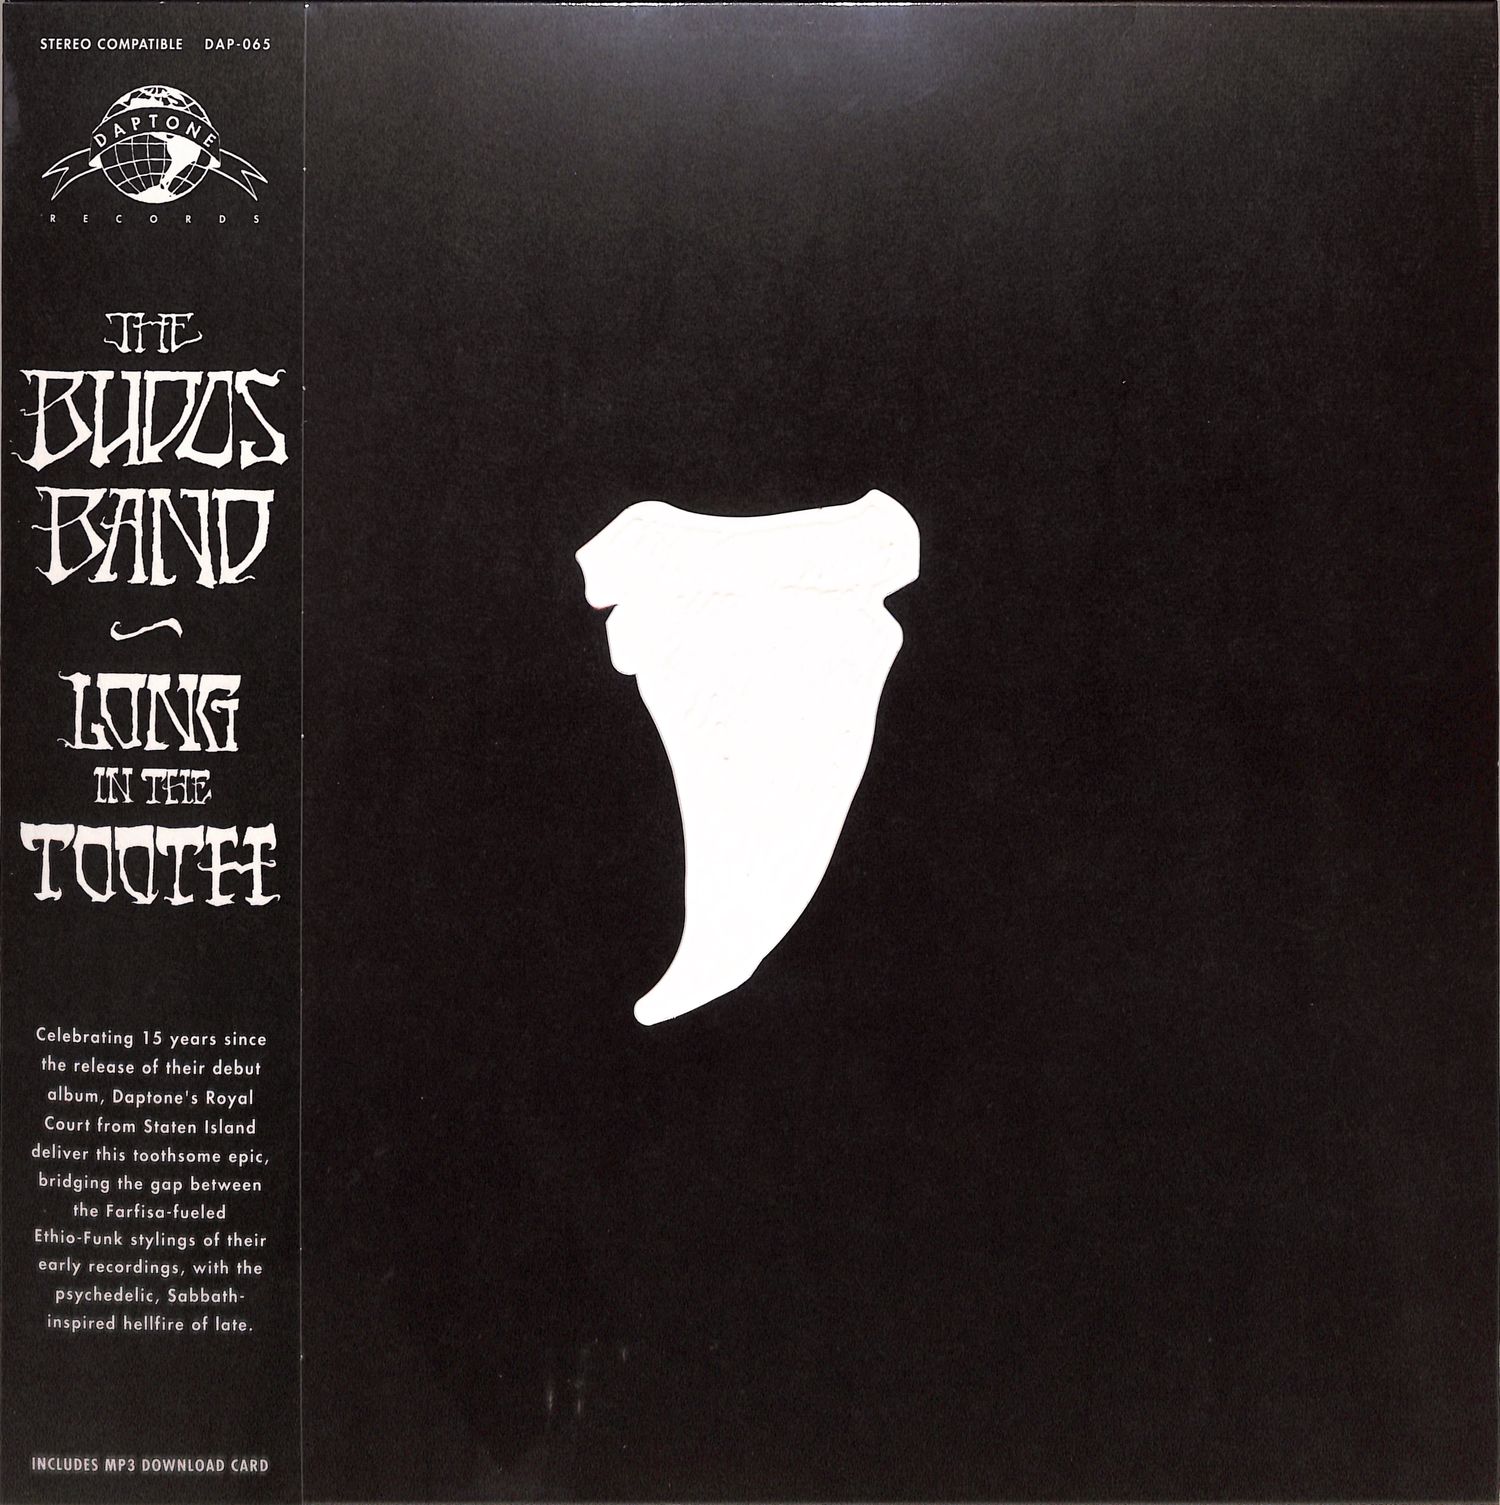 Budos Band - LONG IN THE TOOTH 